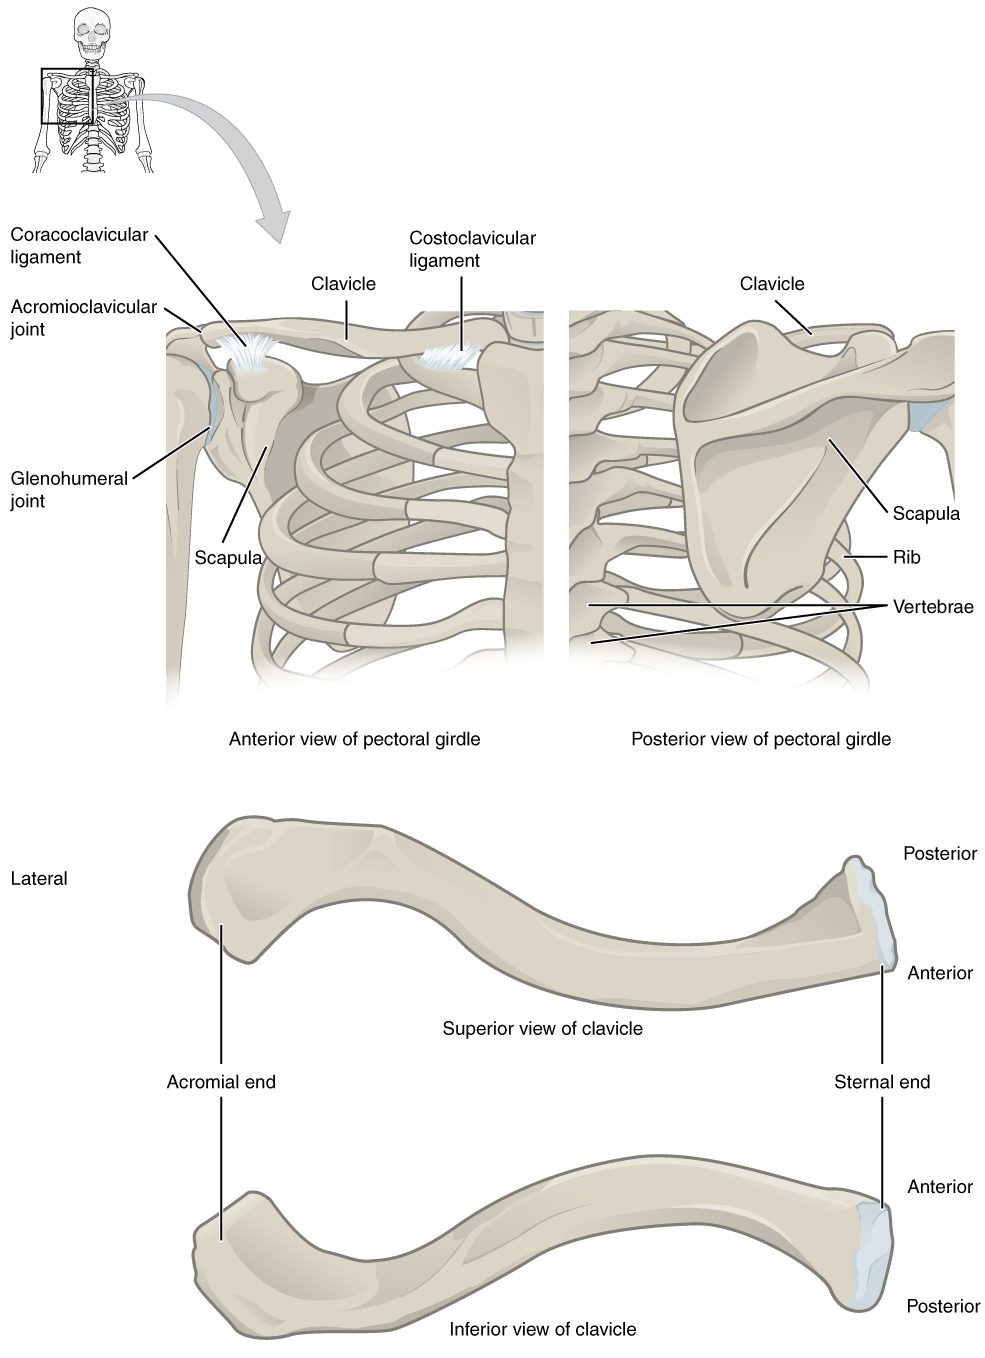 This figure shows the rib change. The top left panel shows the anterior view, and the top right panel shows the posterior view. The bottom panel shows two bones.